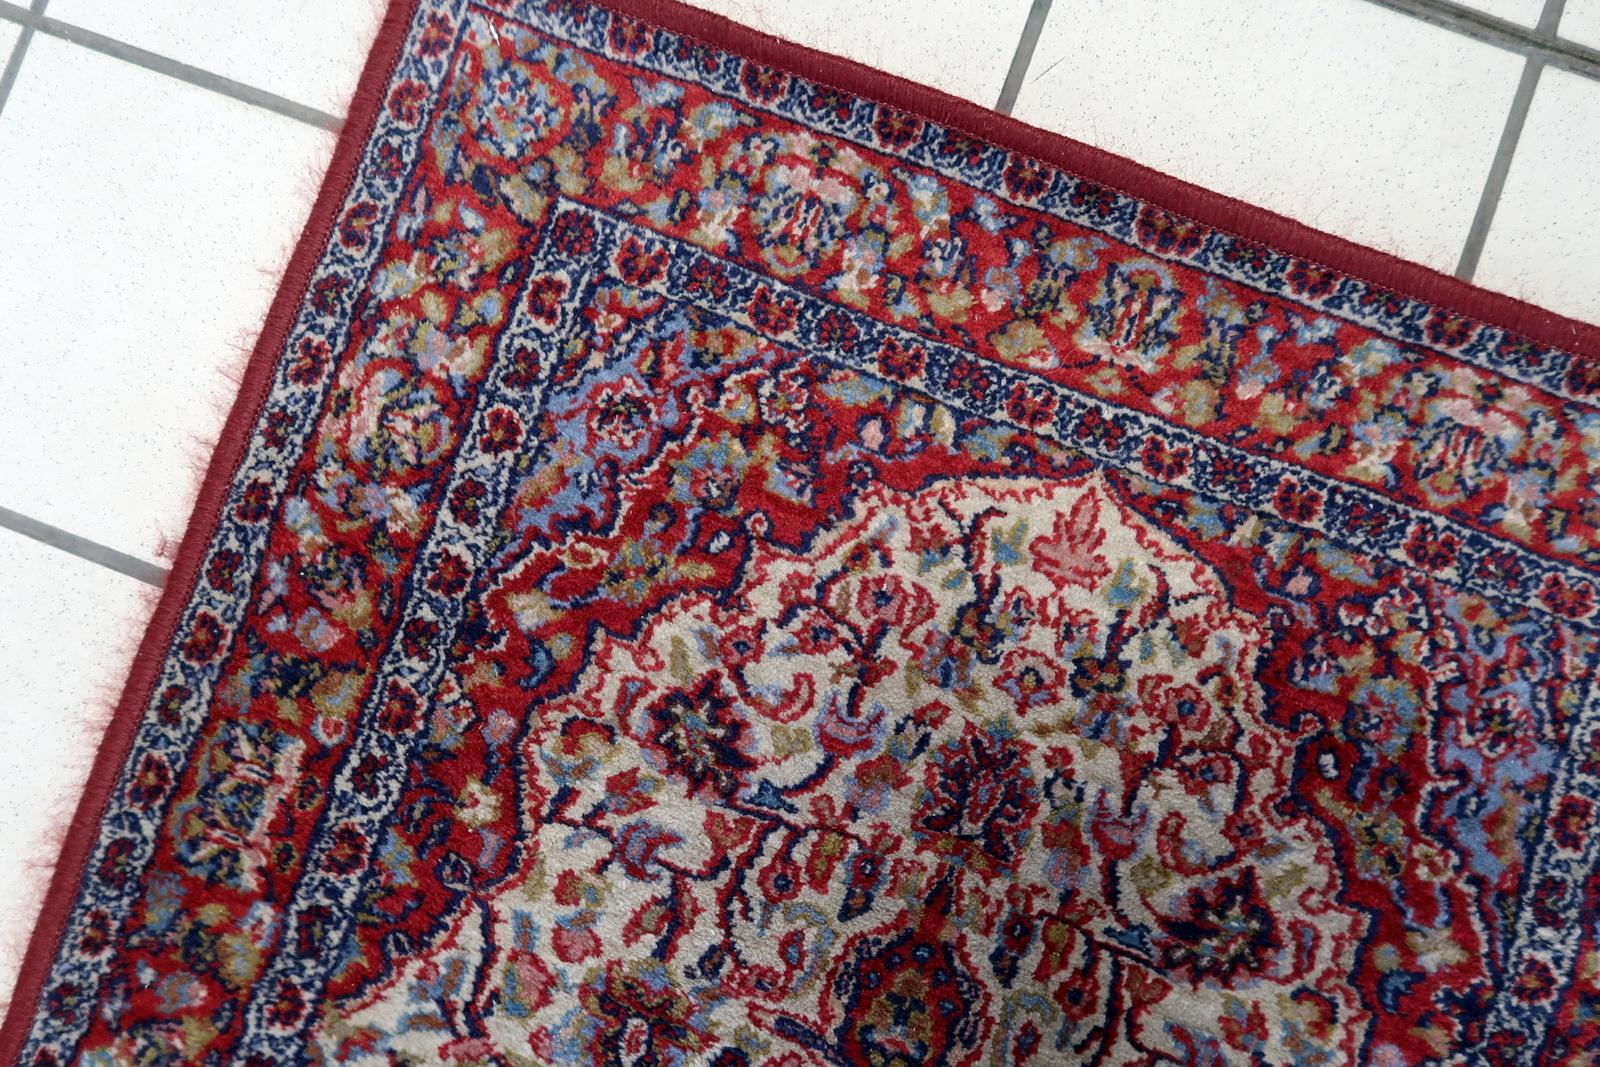 Hand-Knotted Vintage Indian Rug 2.1' x 3.9', 1970s - 1C1121 For Sale